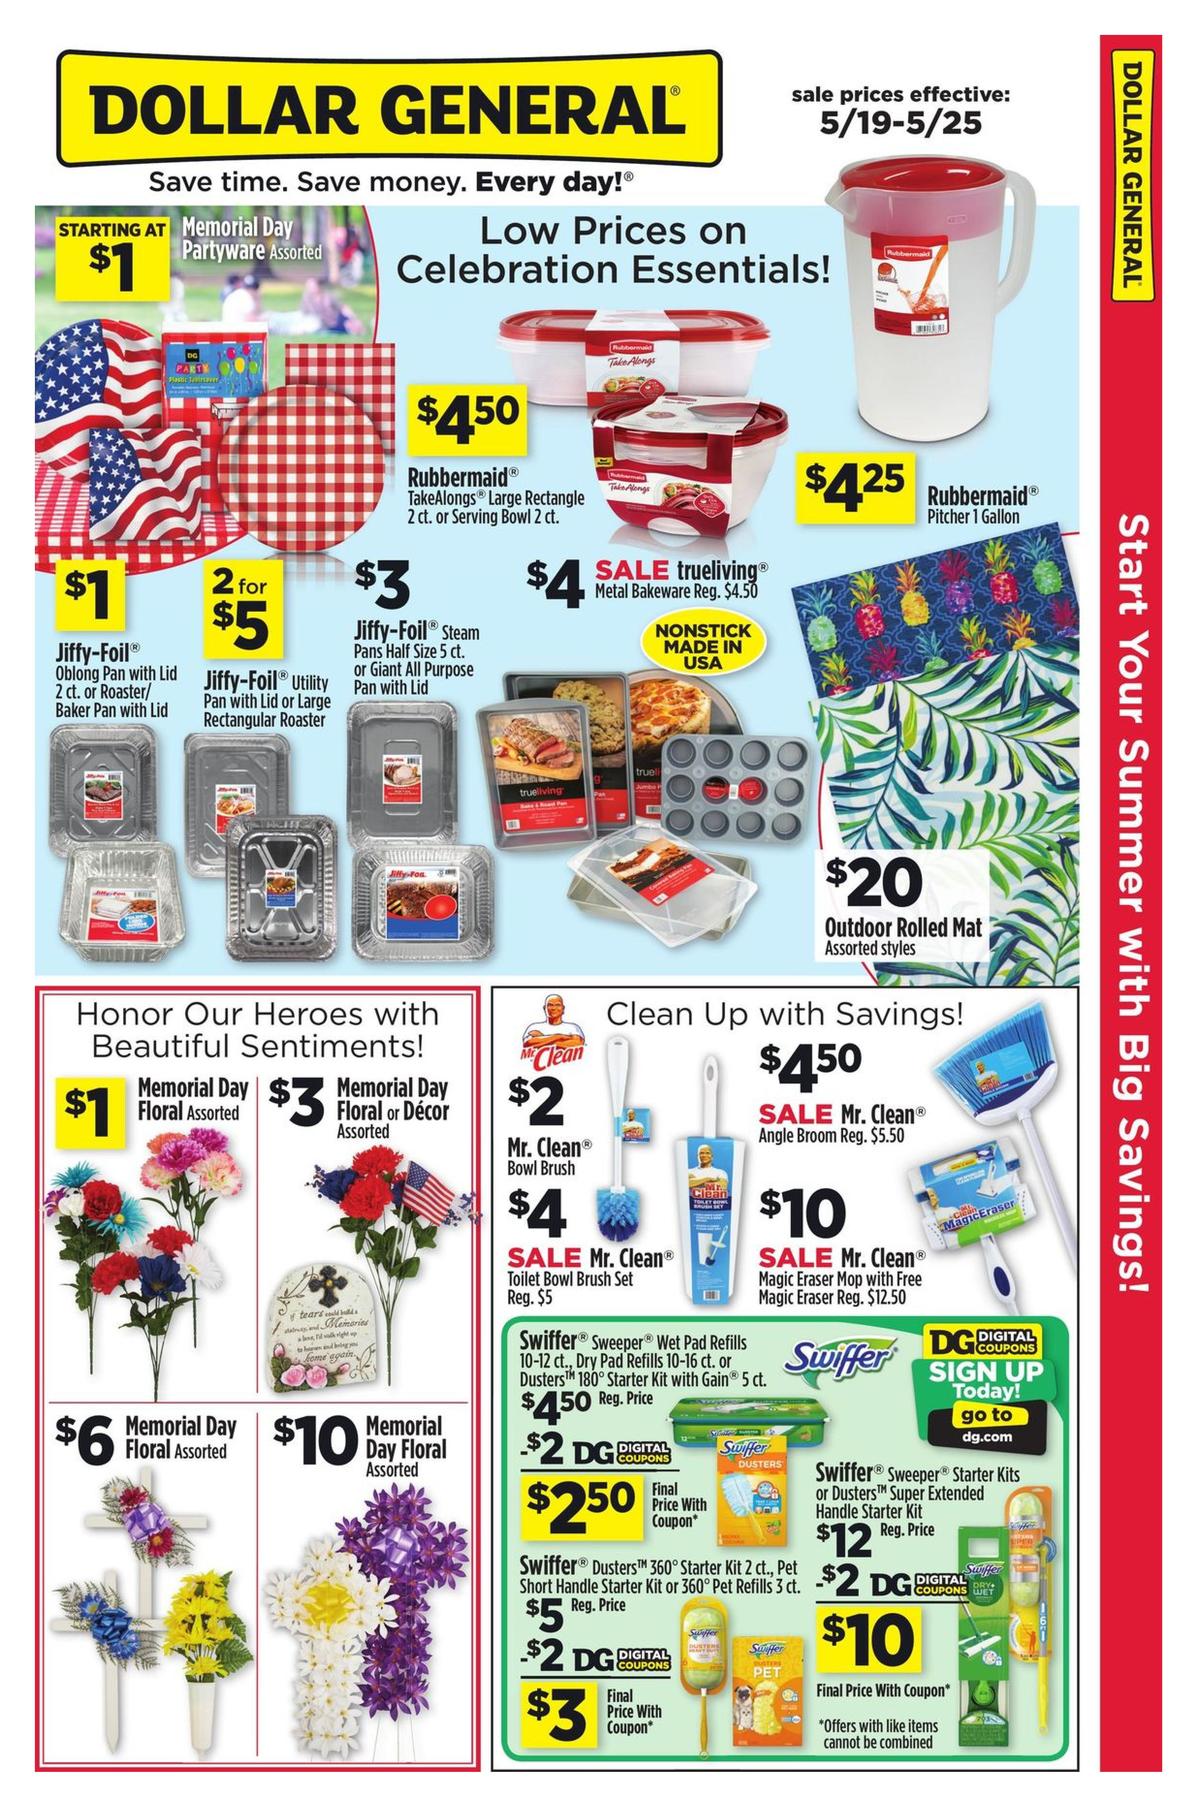 Dollar General Low Prices on Celebration Essentials Weekly Ad from May 19